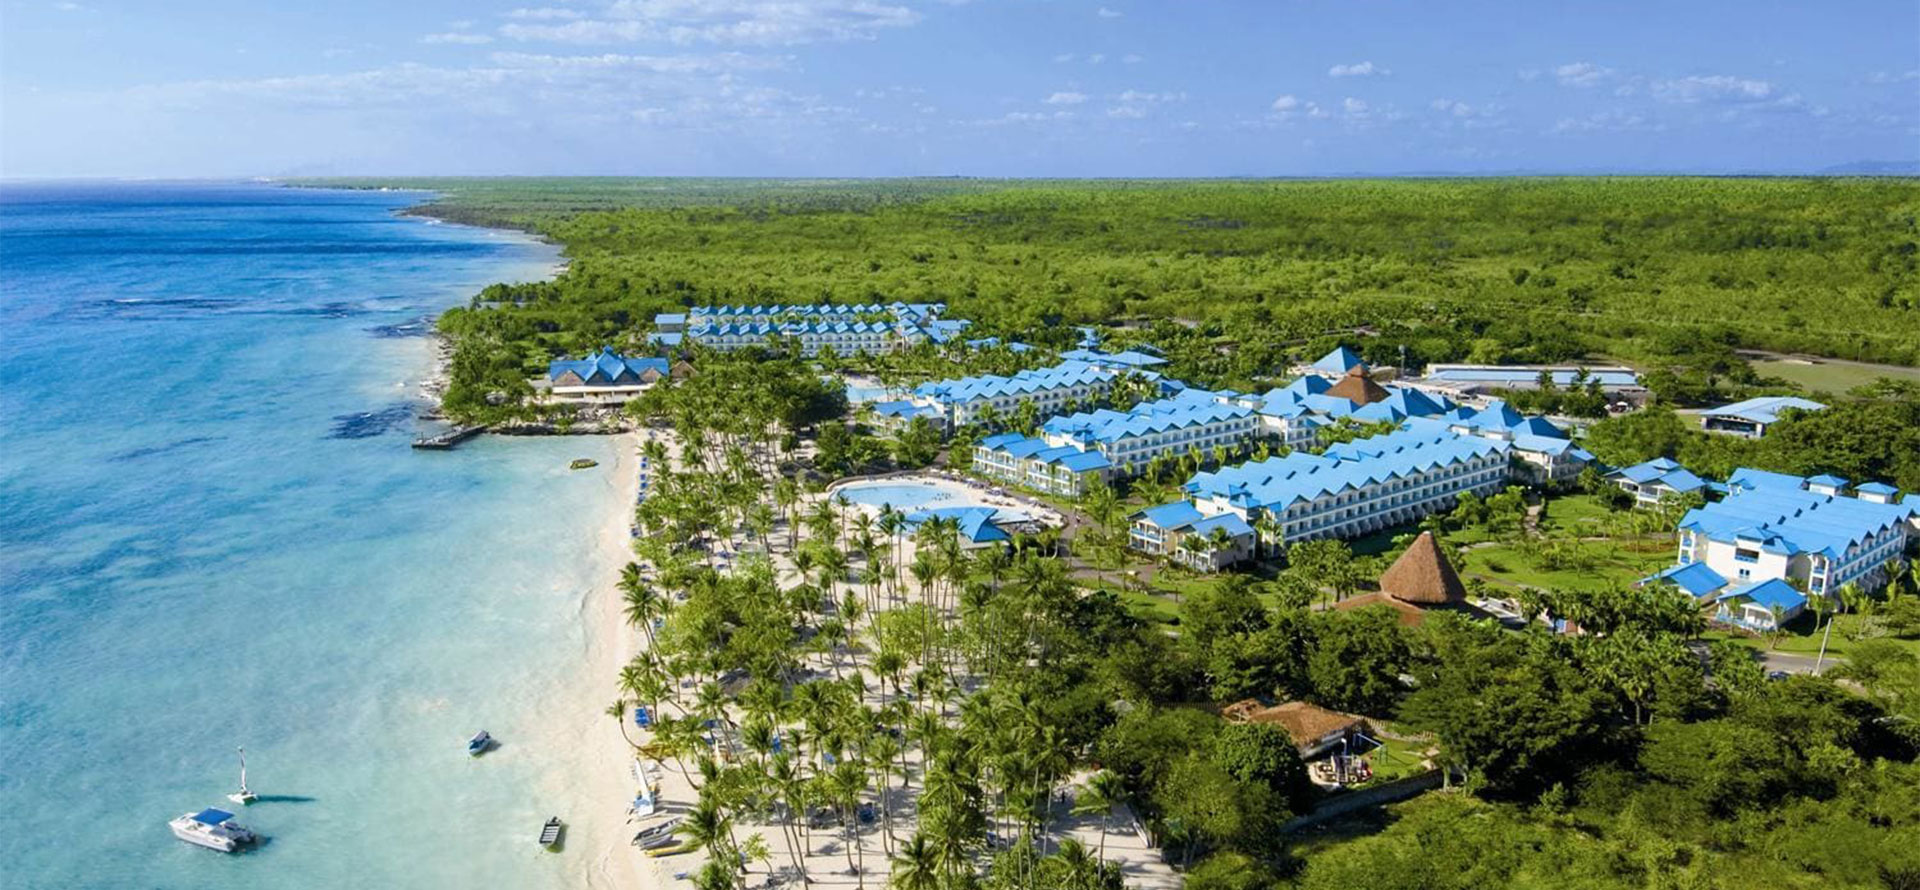 Bird eye view for punta cana all inclusive family resort.